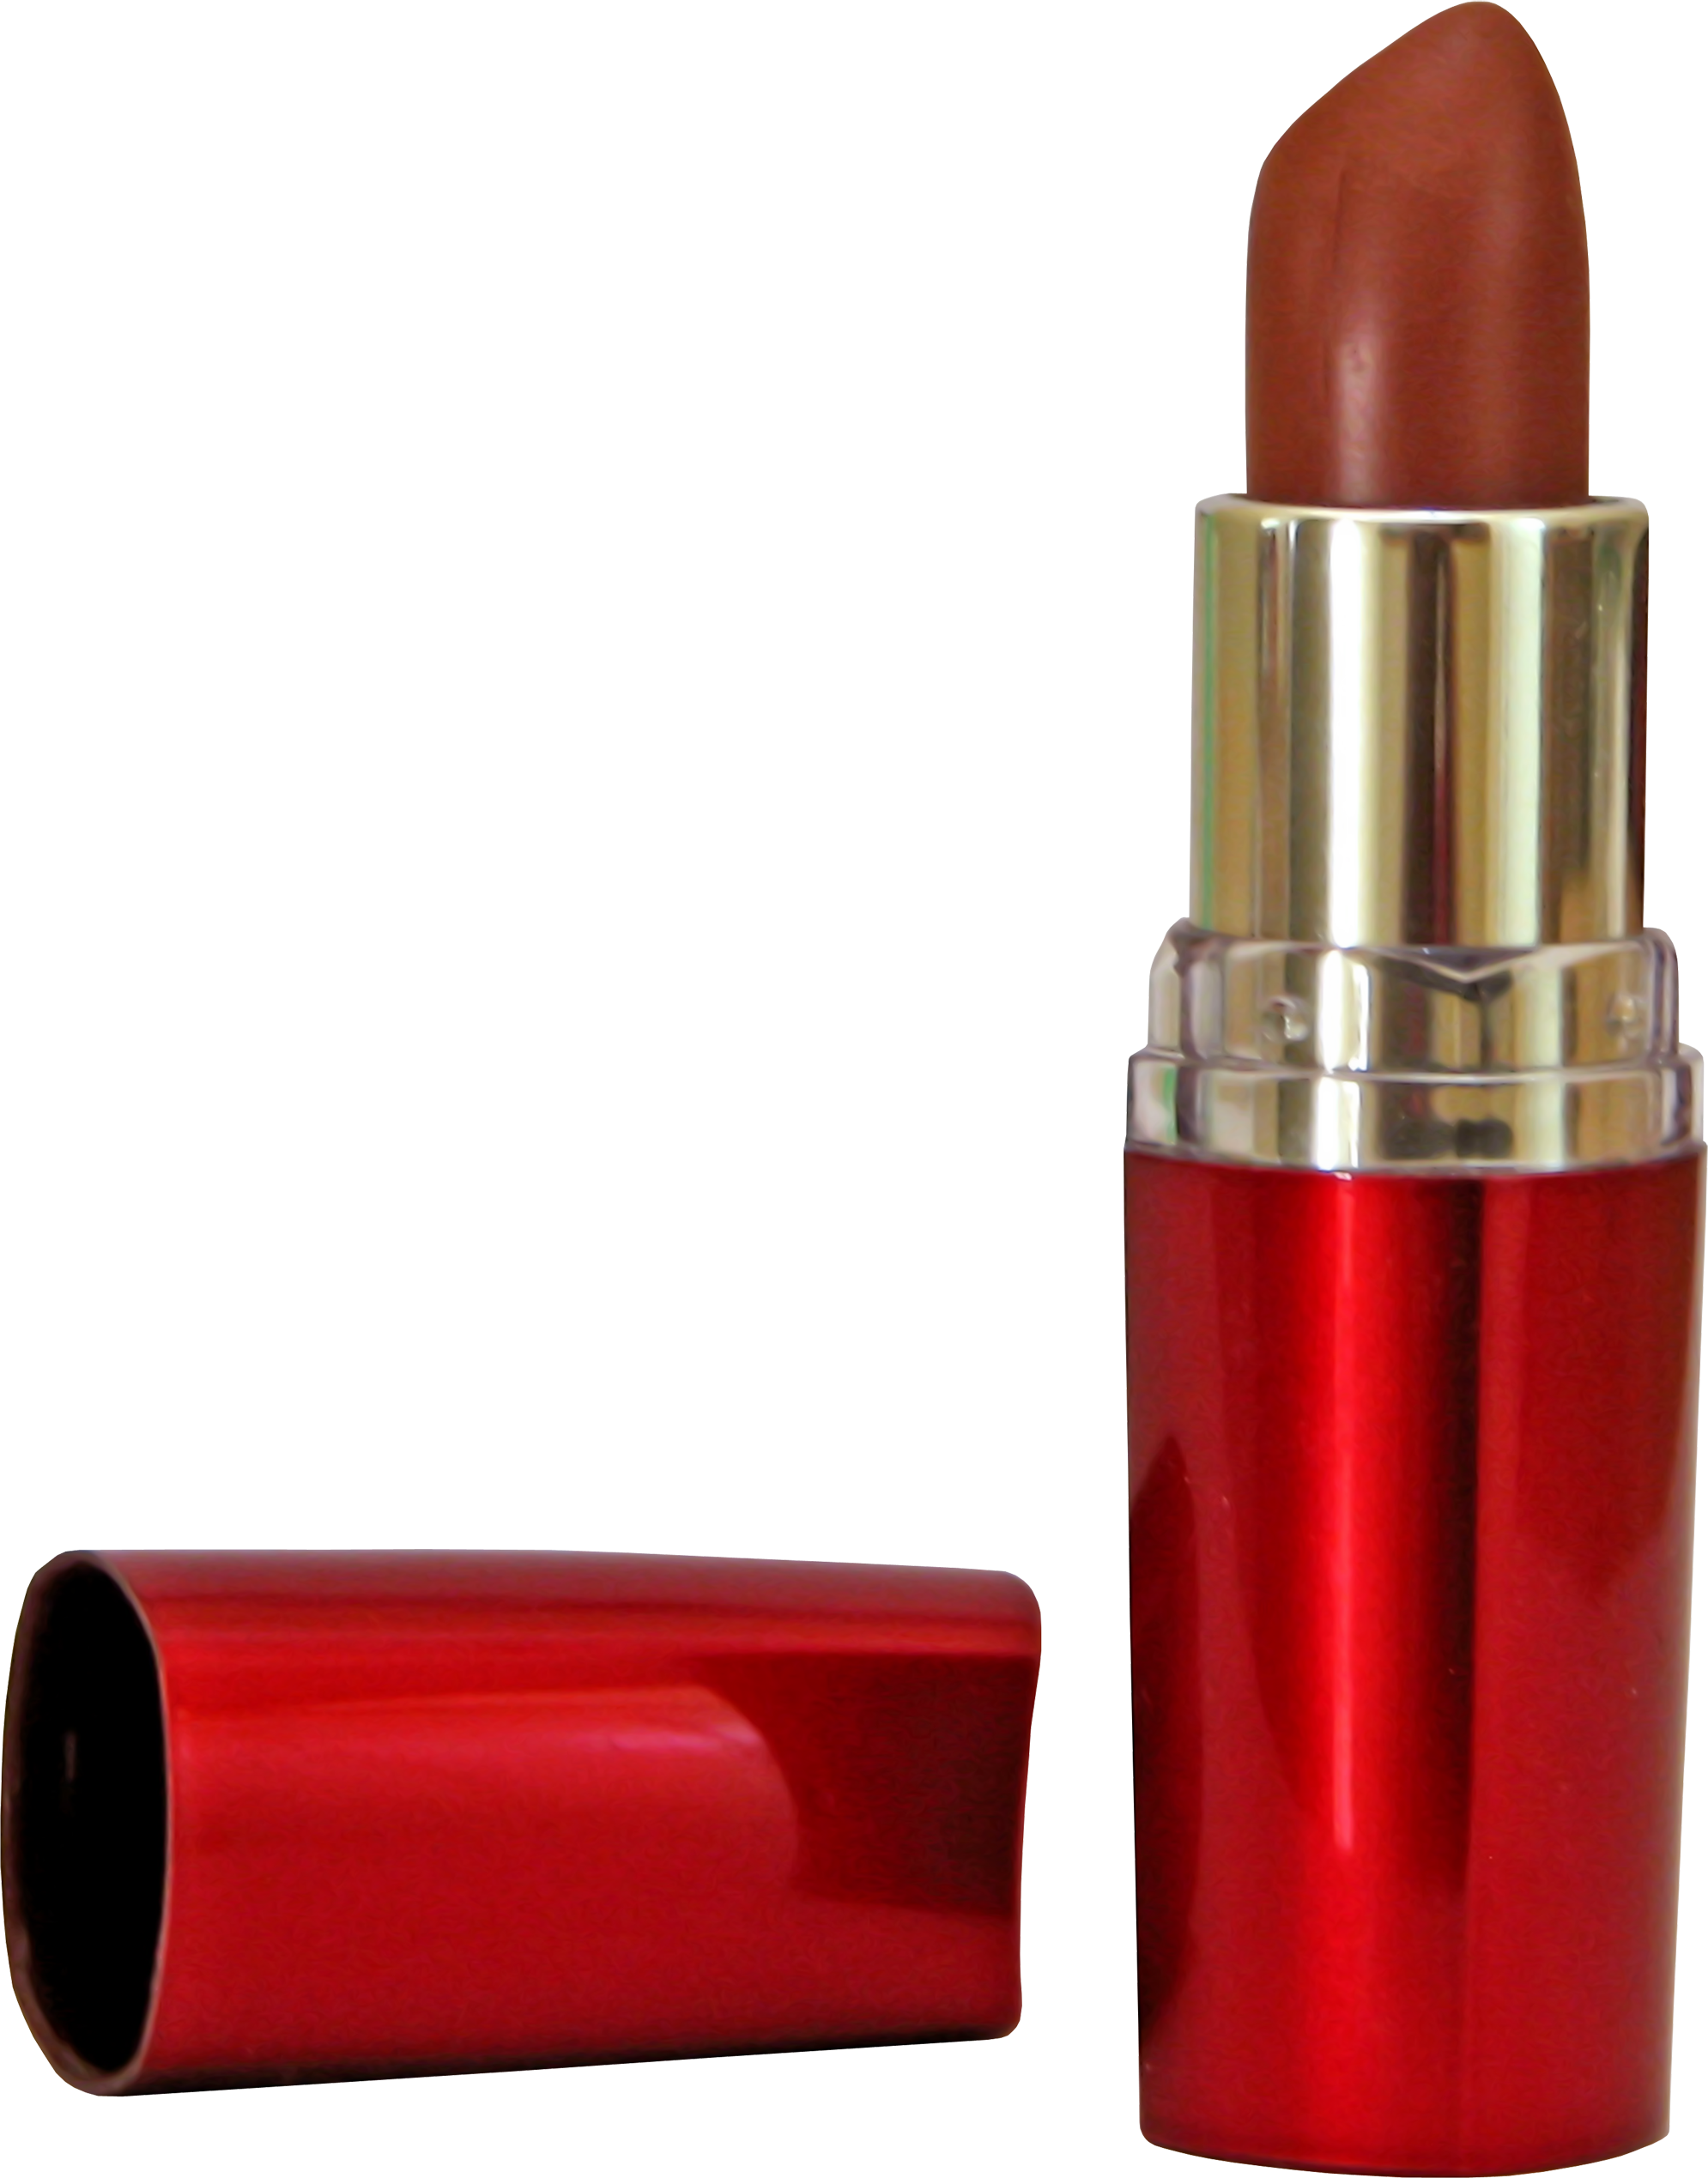 Lipstick PNG images 